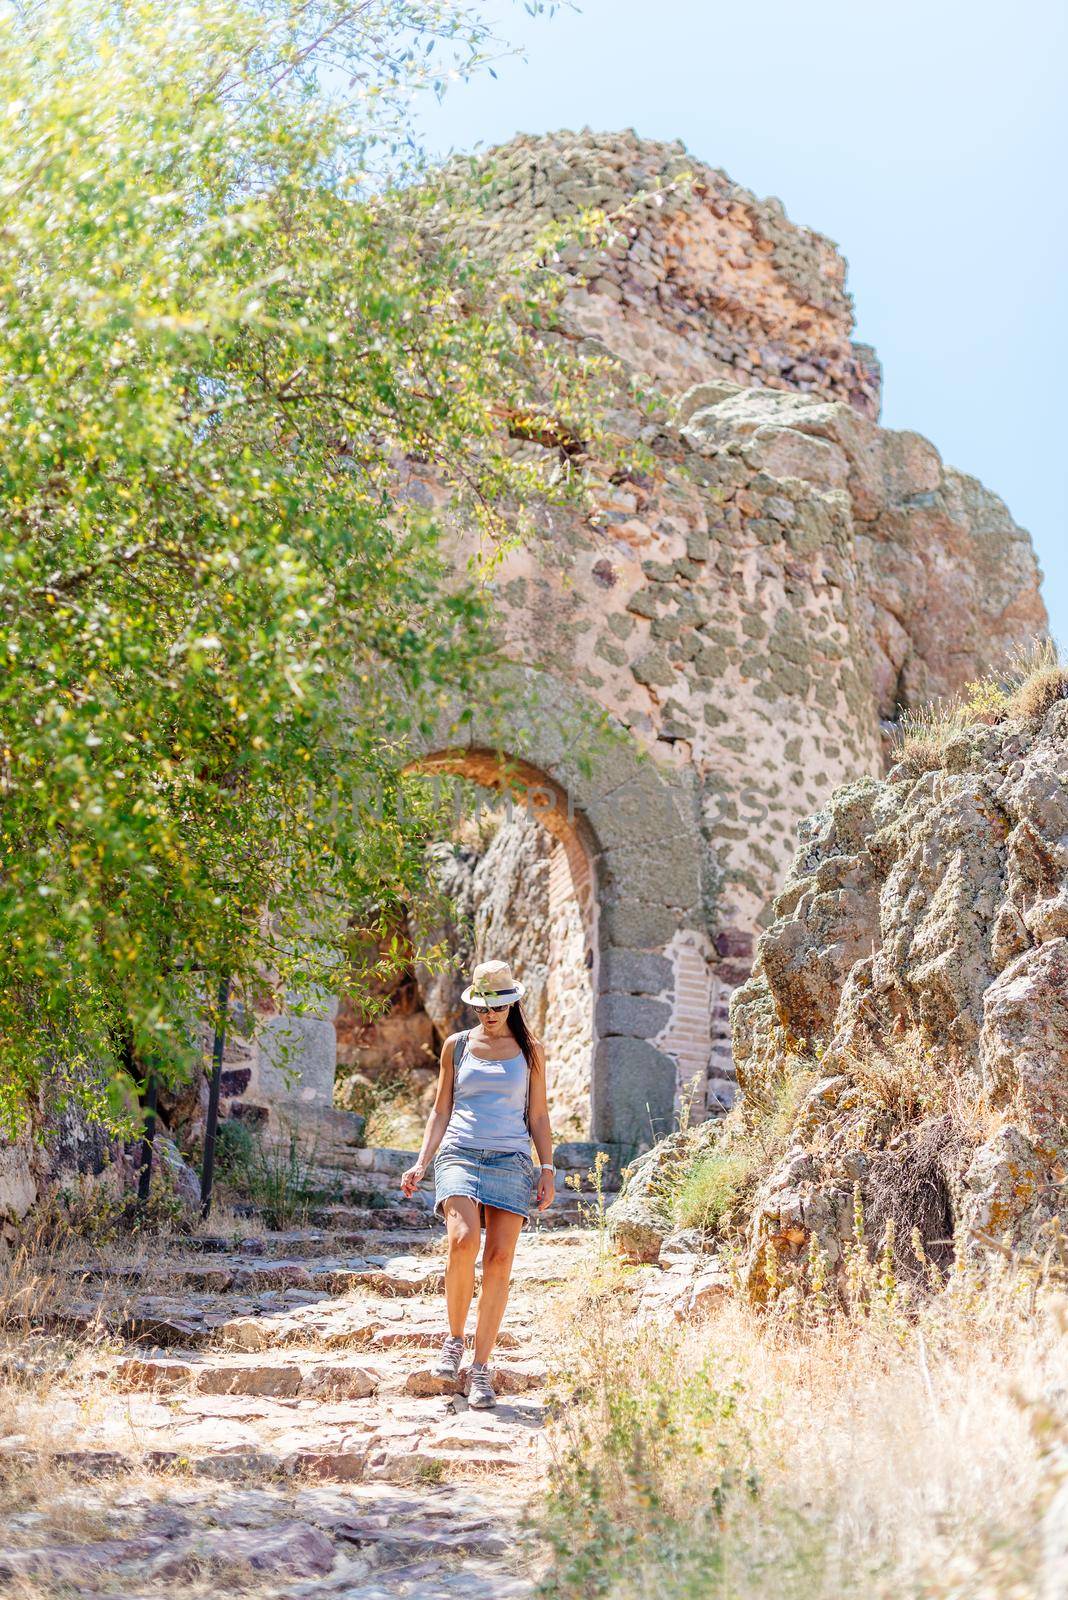 Tourist walking along a dry road in the middle of a medieval castle with an arch in the gate.